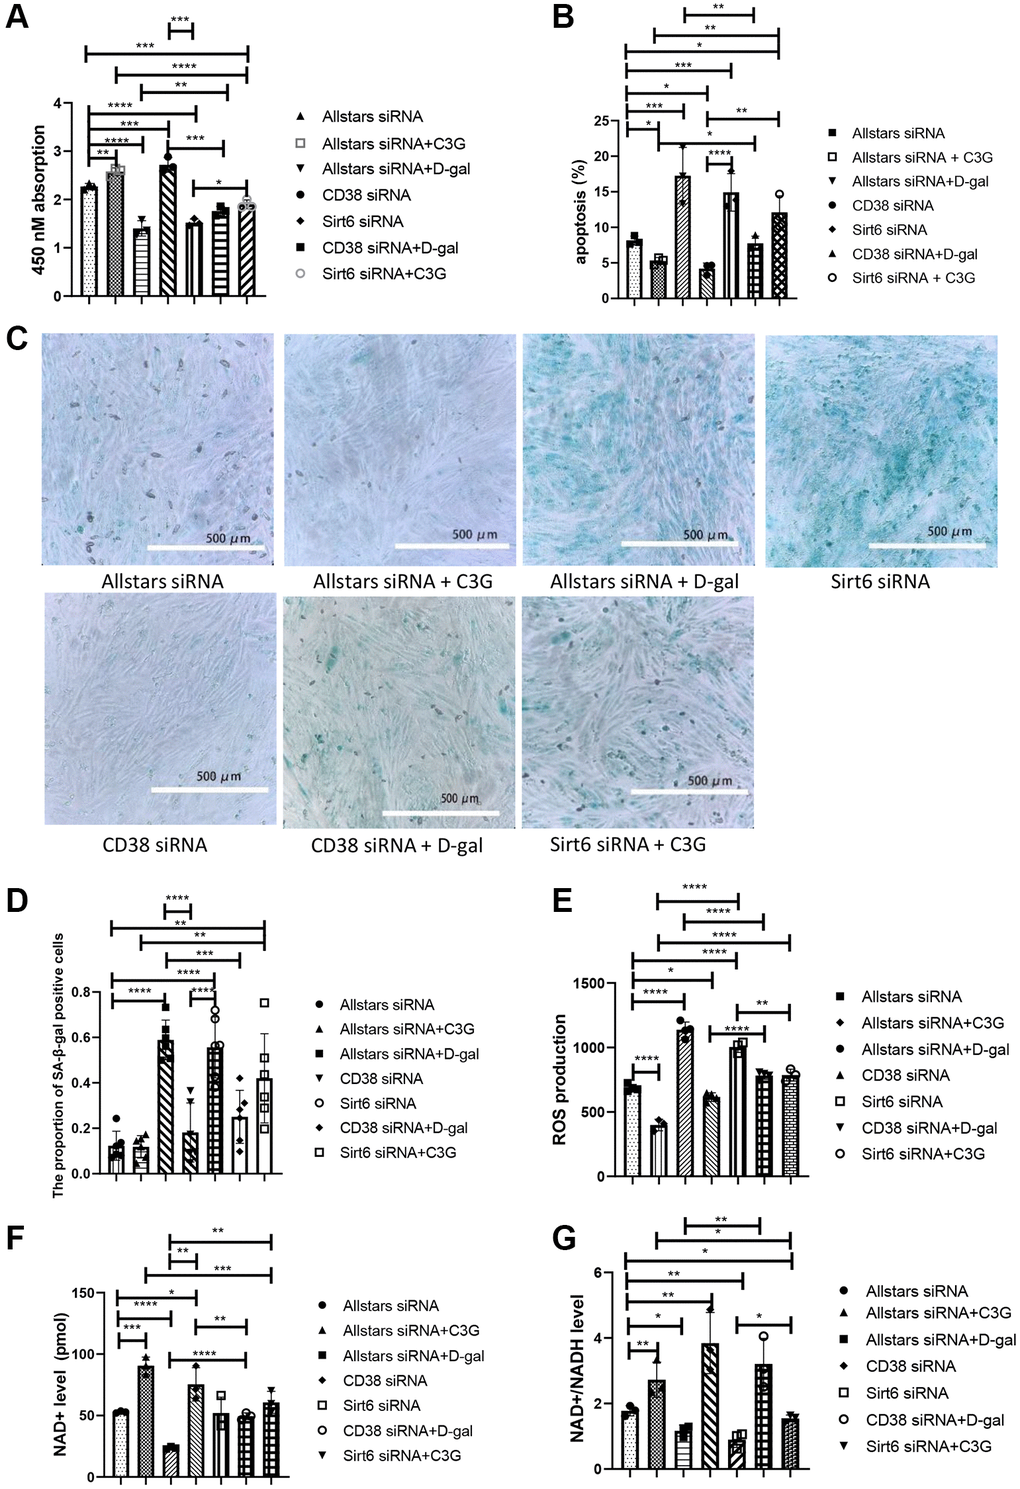 CD38 siRNA alleviated the senescence-related index in D-gal-treated H9c2 cells, and Sirt6 siRNA aggravated the senescence-related index. Cell proliferation was detected with the CCK-8 assay (A), and cell apoptosis was detected using flow cytometry (B). β-Gal expression was observed using cytochemistry (C) and semi0quantitatively analyzed (D). Cellular ROS levels were detected with a ROS assay (E), and the NAD+ level (F) and NAD+/NADH ratio (G) were detected with an NAD+/NADH detection kit. Magnification, 10×. *P **P ***P ****P 